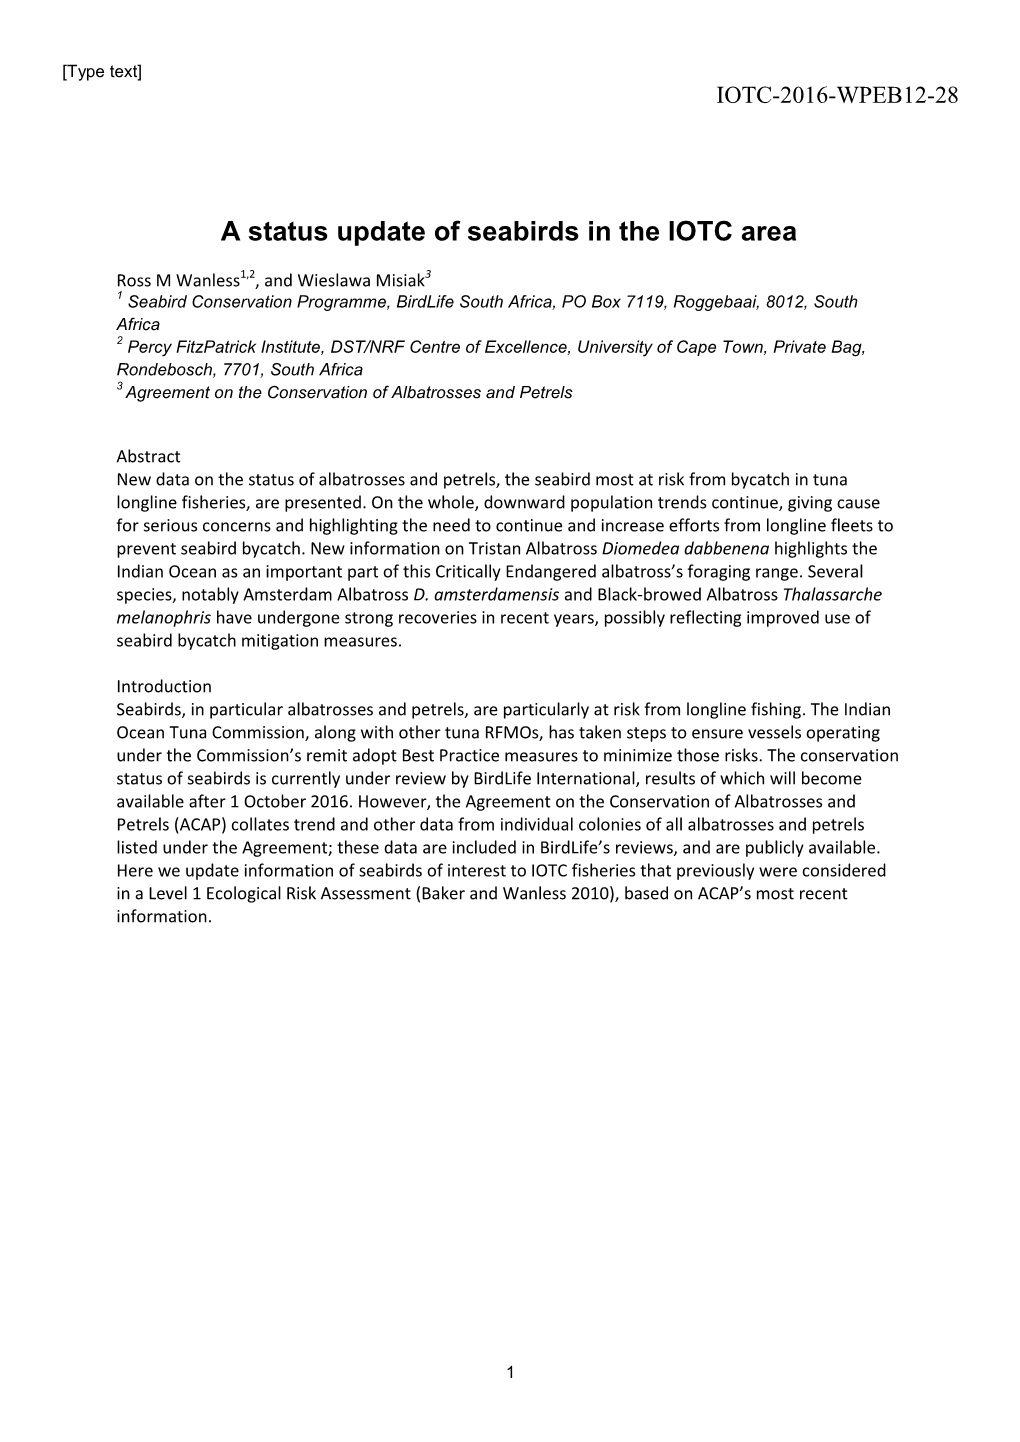 A Status Update of Seabirds in the IOTC Area